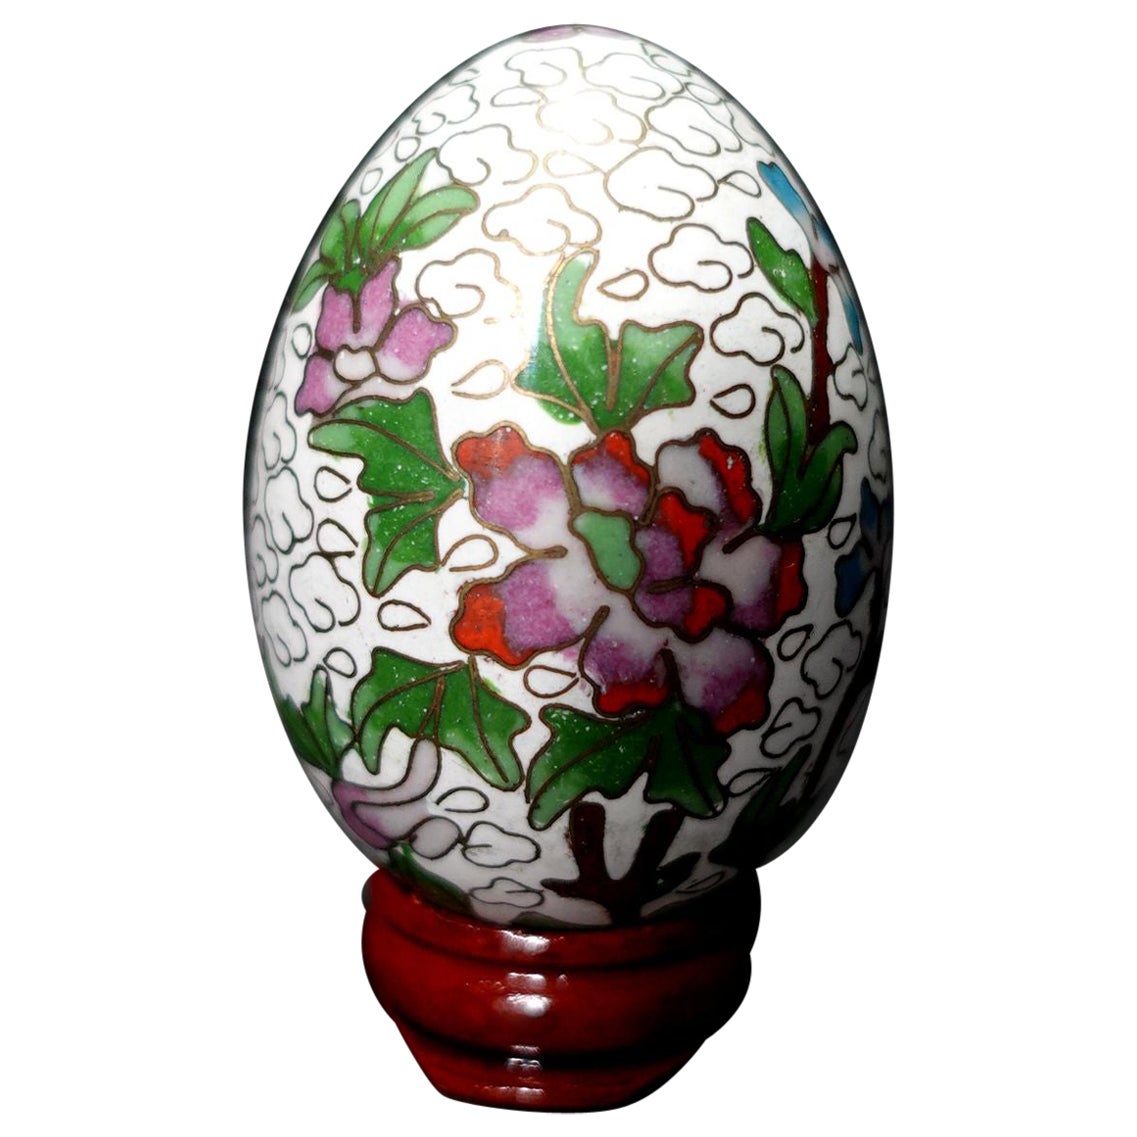 Chinese Cloisonné Enamel Egg "Flowers" with Wood Stand, Early 20th Century #2